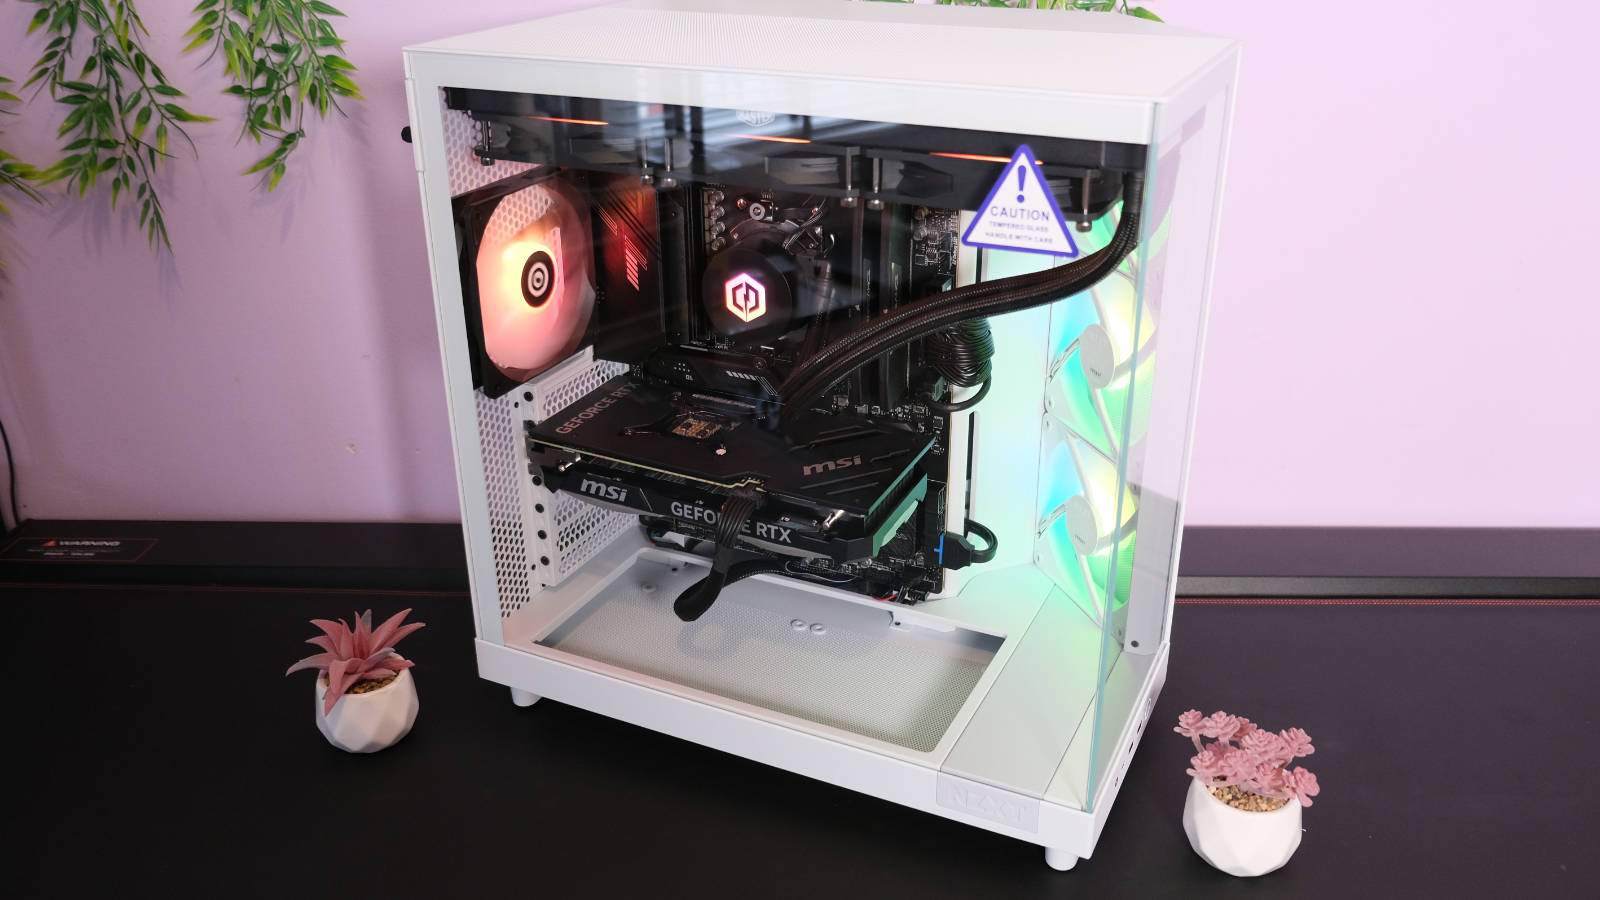 CyberpowerPC UK Ultra R77 with its RGB lights shining against the white case.